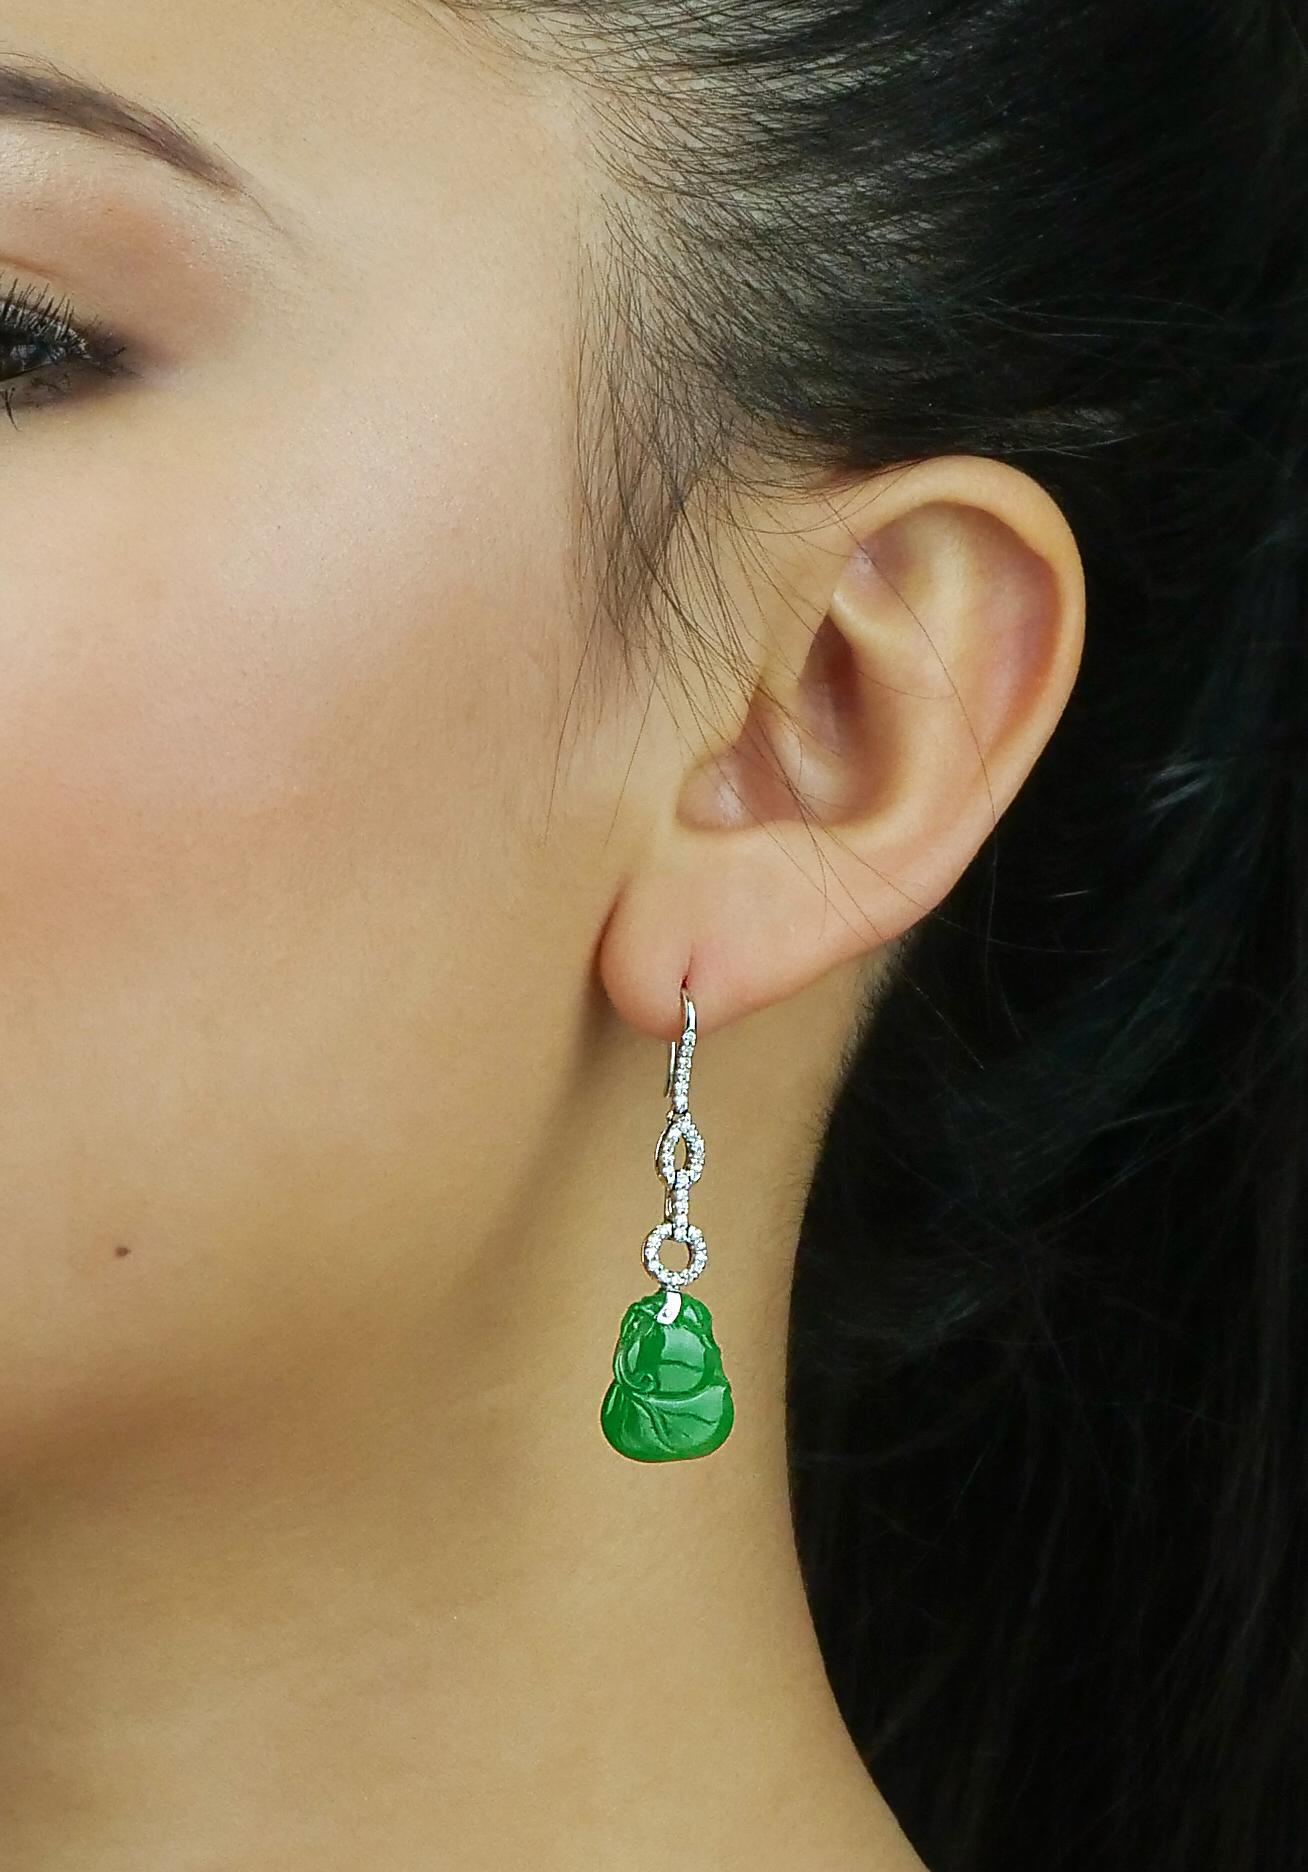 Stunning jade earrings in Gourd Bottle Shape is a symbol of the Chinese Xian immortals. Dangled by various shapes of links, circular and oval white gold links covered in glistening diamonds. The jade is calm and cooling and has a gorgeous sheer